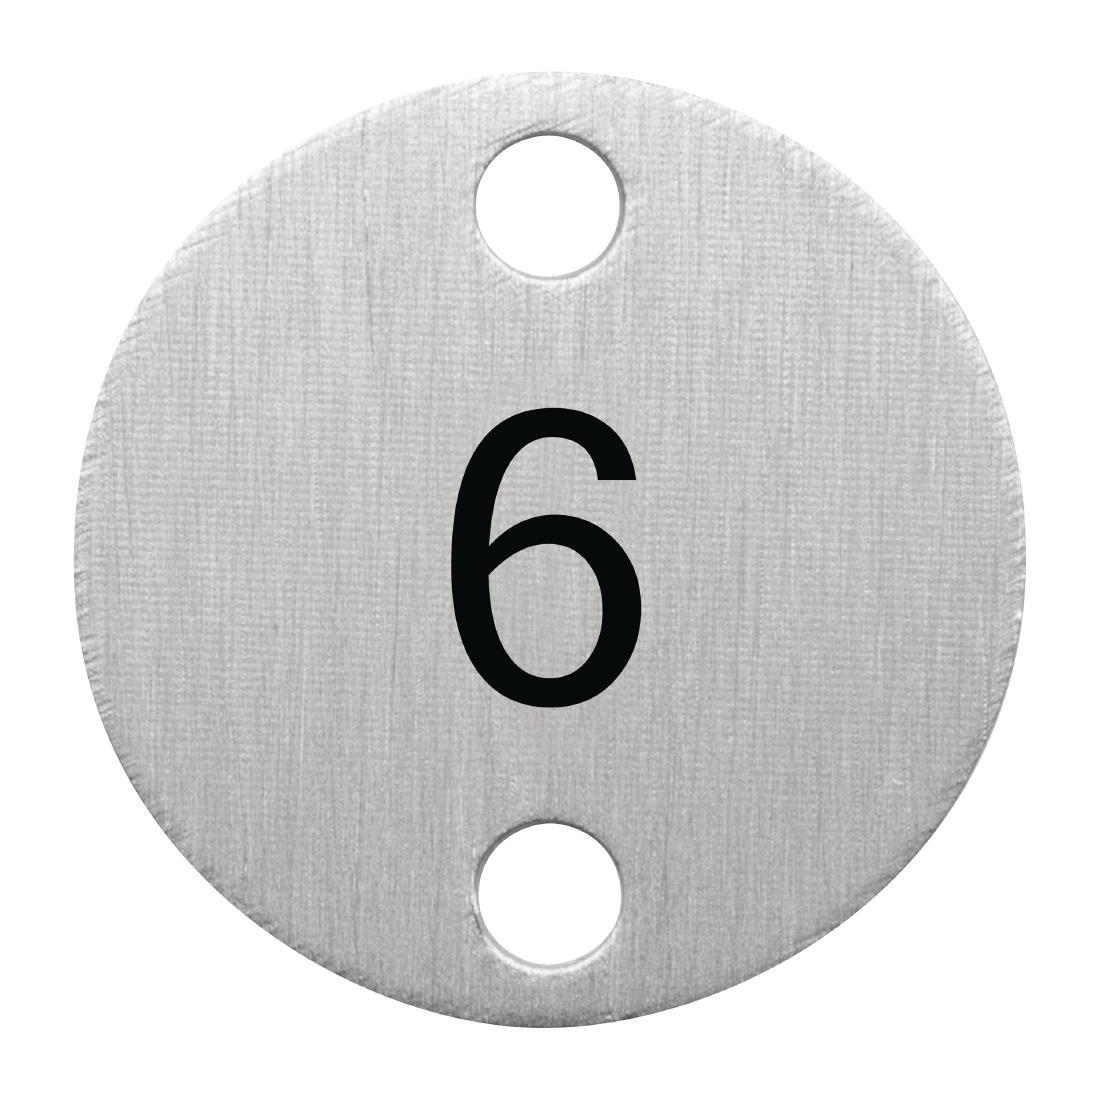 Bolero Table Numbers Silver (6-10) - DY771  - 1